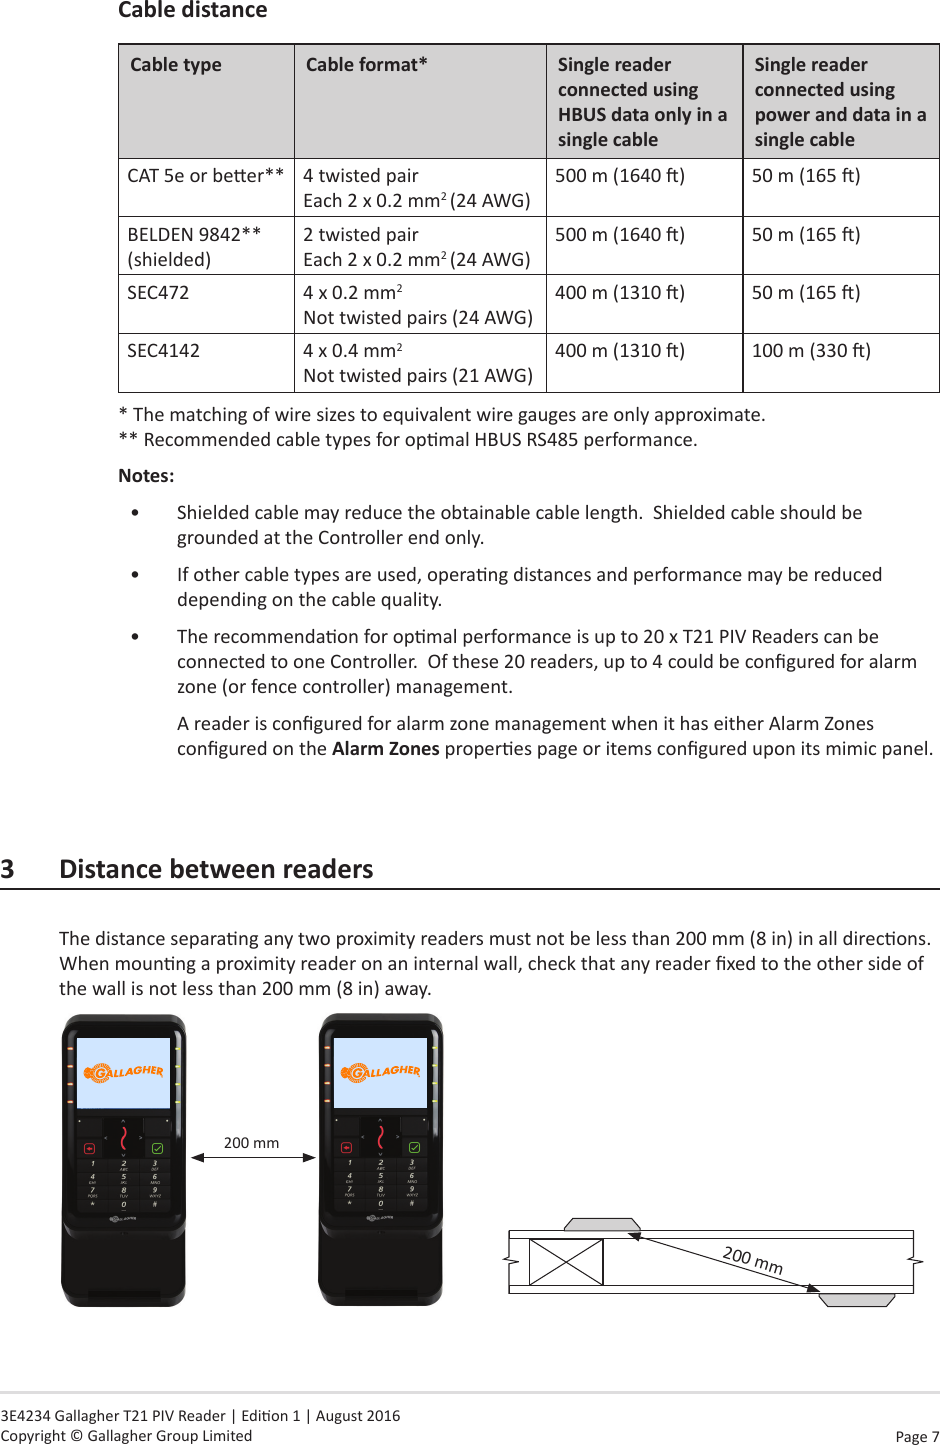 Page  7   3E4234 Gallagher T21 PIV Reader | Edion 1 | August 2016 Copyright © Gallagher Group LimitedCable distanceCable type Cable format* Single reader connected using HBUS data only in a single cableSingle reader connected using  power and data in a single cableCAT 5e or beer** 4 twisted pair Each 2 x 0.2 mm2 (24 AWG)500 m (1640 ) 50 m (165 )BELDEN 9842** (shielded)2 twisted pair Each 2 x 0.2 mm2 (24 AWG)500 m (1640 ) 50 m (165 )SEC472 4 x 0.2 mm2 Not twisted pairs (24 AWG)400 m (1310 ) 50 m (165 )SEC4142 4 x 0.4 mm2 Not twisted pairs (21 AWG)400 m (1310 ) 100 m (330 )* The matching of wire sizes to equivalent wire gauges are only approximate. ** Recommended cable types for opmal HBUS RS485 performance.Notes:•  Shielded cable may reduce the obtainable cable length.  Shielded cable should be grounded at the Controller end only.  •  If other cable types are used, operang distances and performance may be reduced depending on the cable quality.•  The recommendaon for opmal performance is up to 20 x T21 PIV Readers can be connected to one Controller.  Of these 20 readers, up to 4 could be congured for alarm zone (or fence controller) management.A reader is congured for alarm zone management when it has either Alarm Zones congured on the Alarm Zones properes page or items congured upon its mimic panel.3  Distance between readersThe distance separang any two proximity readers must not be less than 200 mm (8 in) in all direcons.  When mounng a proximity reader on an internal wall, check that any reader xed to the other side of the wall is not less than 200 mm (8 in) away.200 mm               200 mm